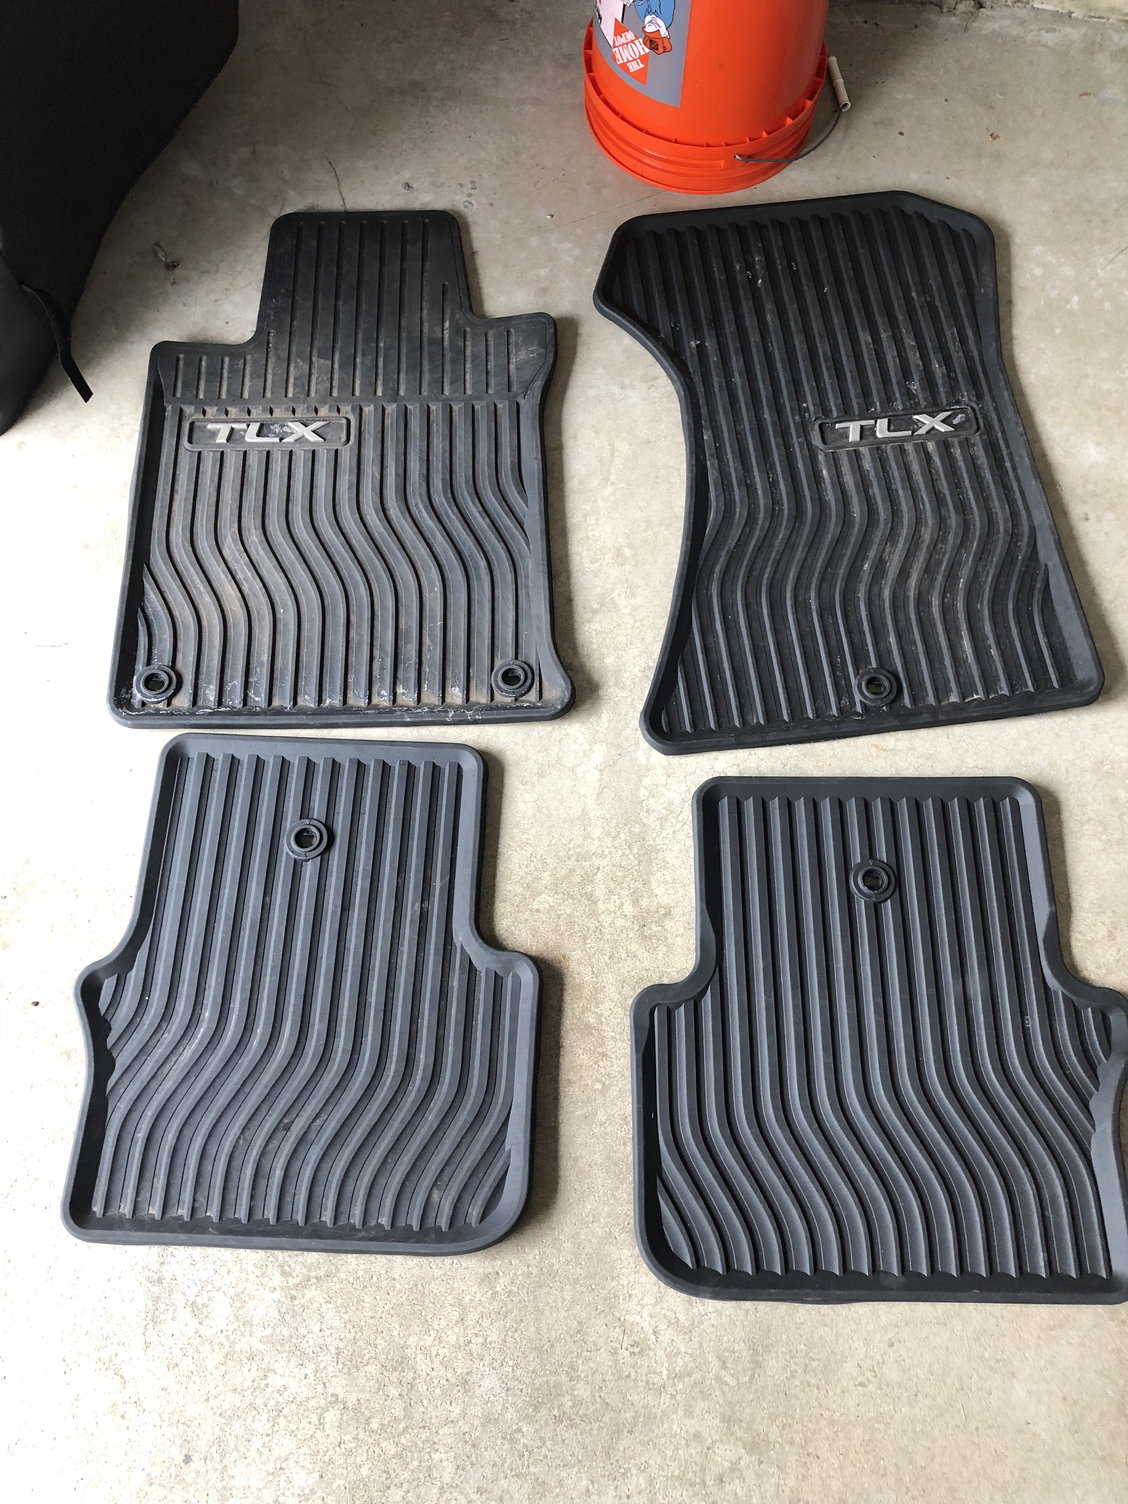 Accessories - FS: 2015-2017 Acura TLX AWD Factory All Weather Floor Mats - Used - 2015 to 2017 Acura TLX - Aurora, IL 60502, United States